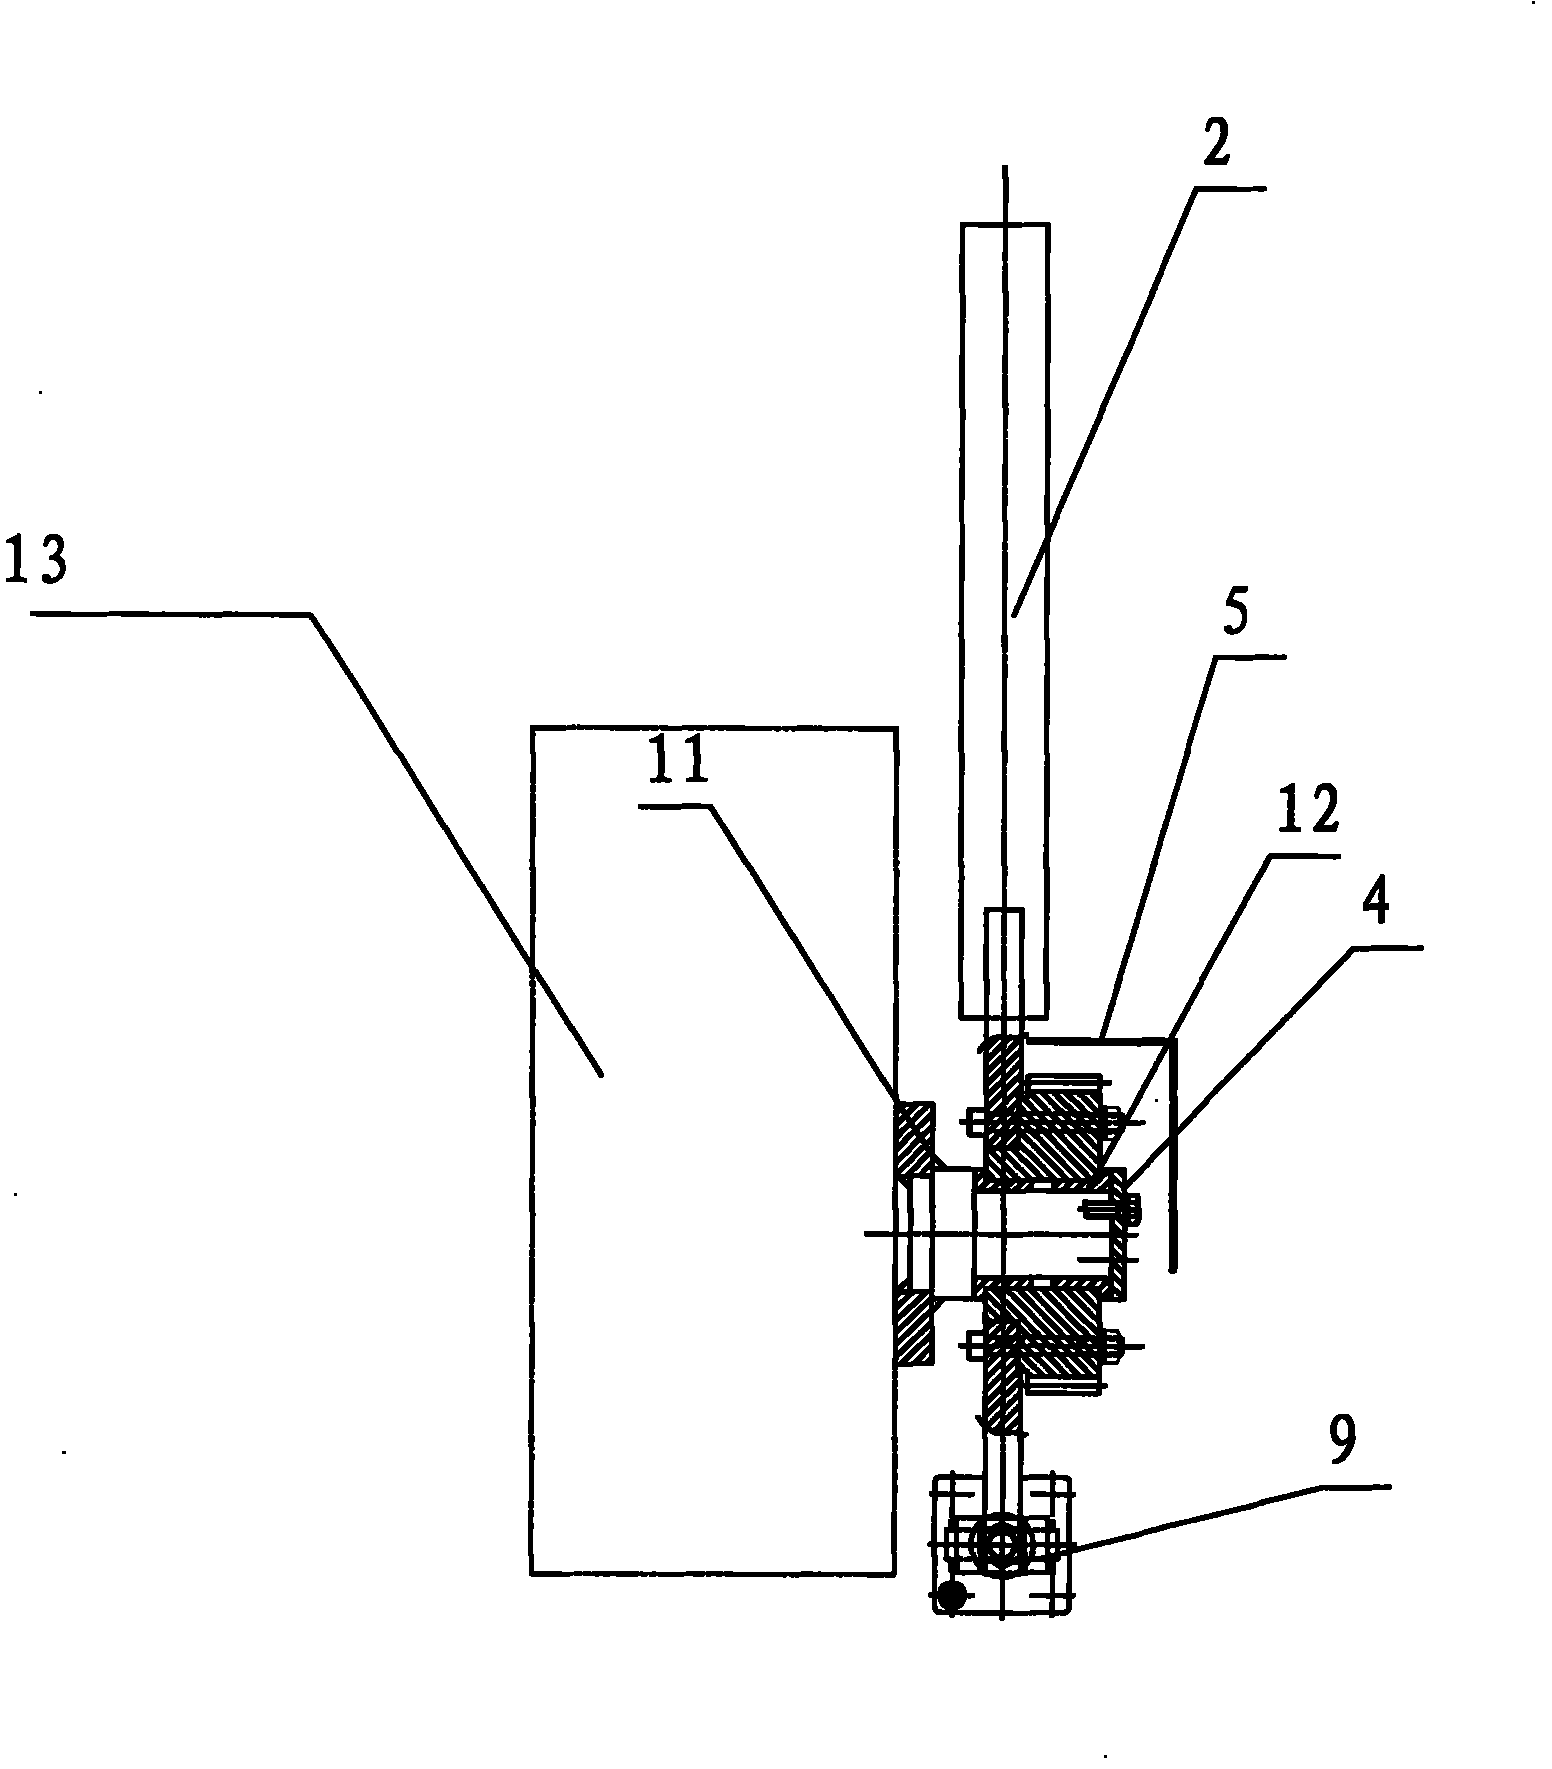 Centering mechanism of transverse leveling machine for T-shaped rafts